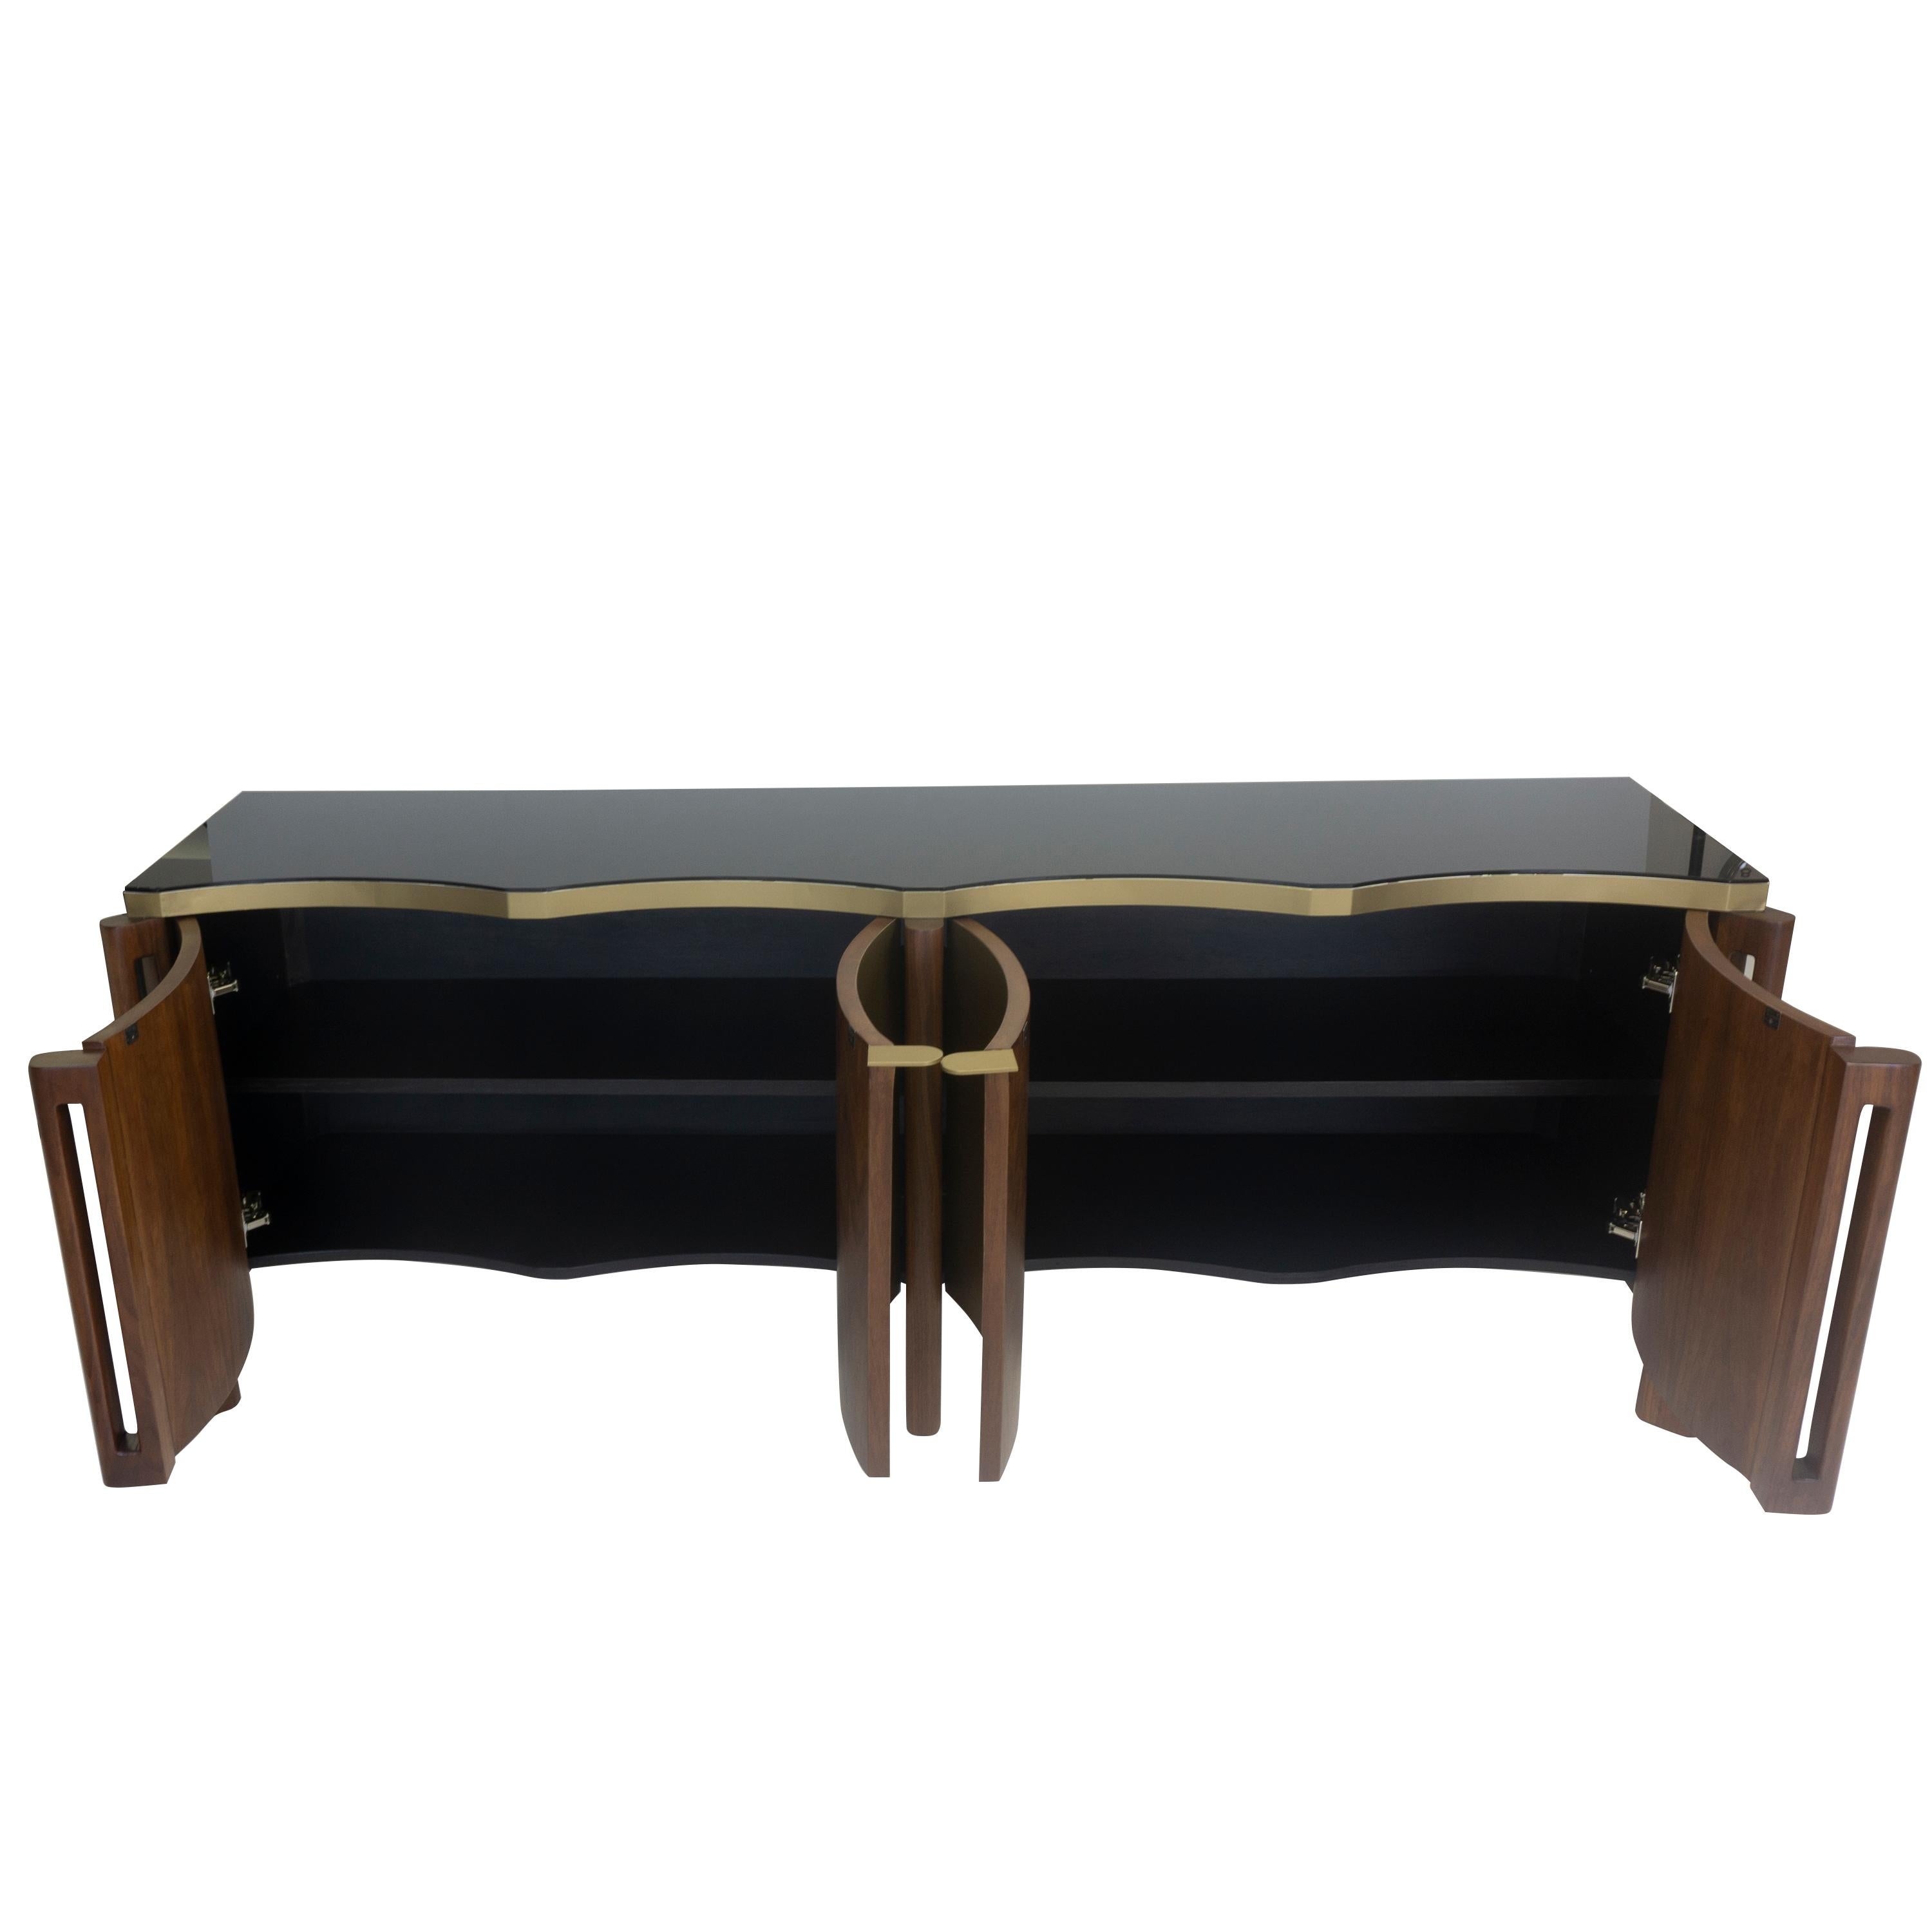 American Modern Buffet Table with Glass Top and Scalloped Edge For Sale